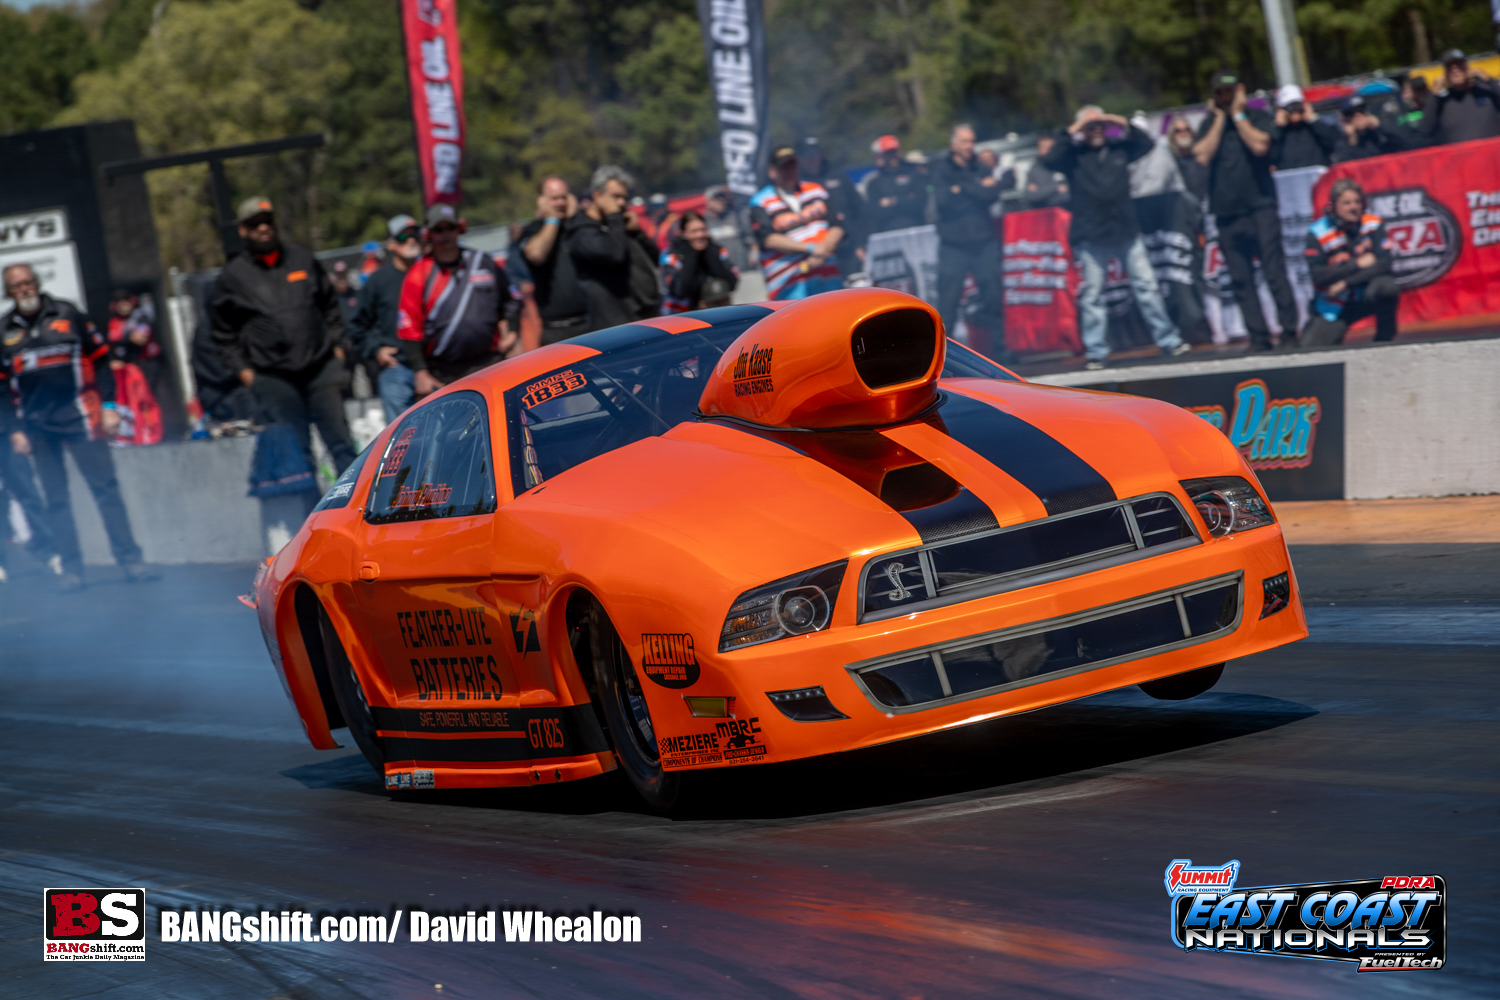 More PDRA 2024 East Coast Nationals Action Photos: Dragsters, Door Cars, And All The Tire Smoking Wheelstanding Action Shots You Want To See!